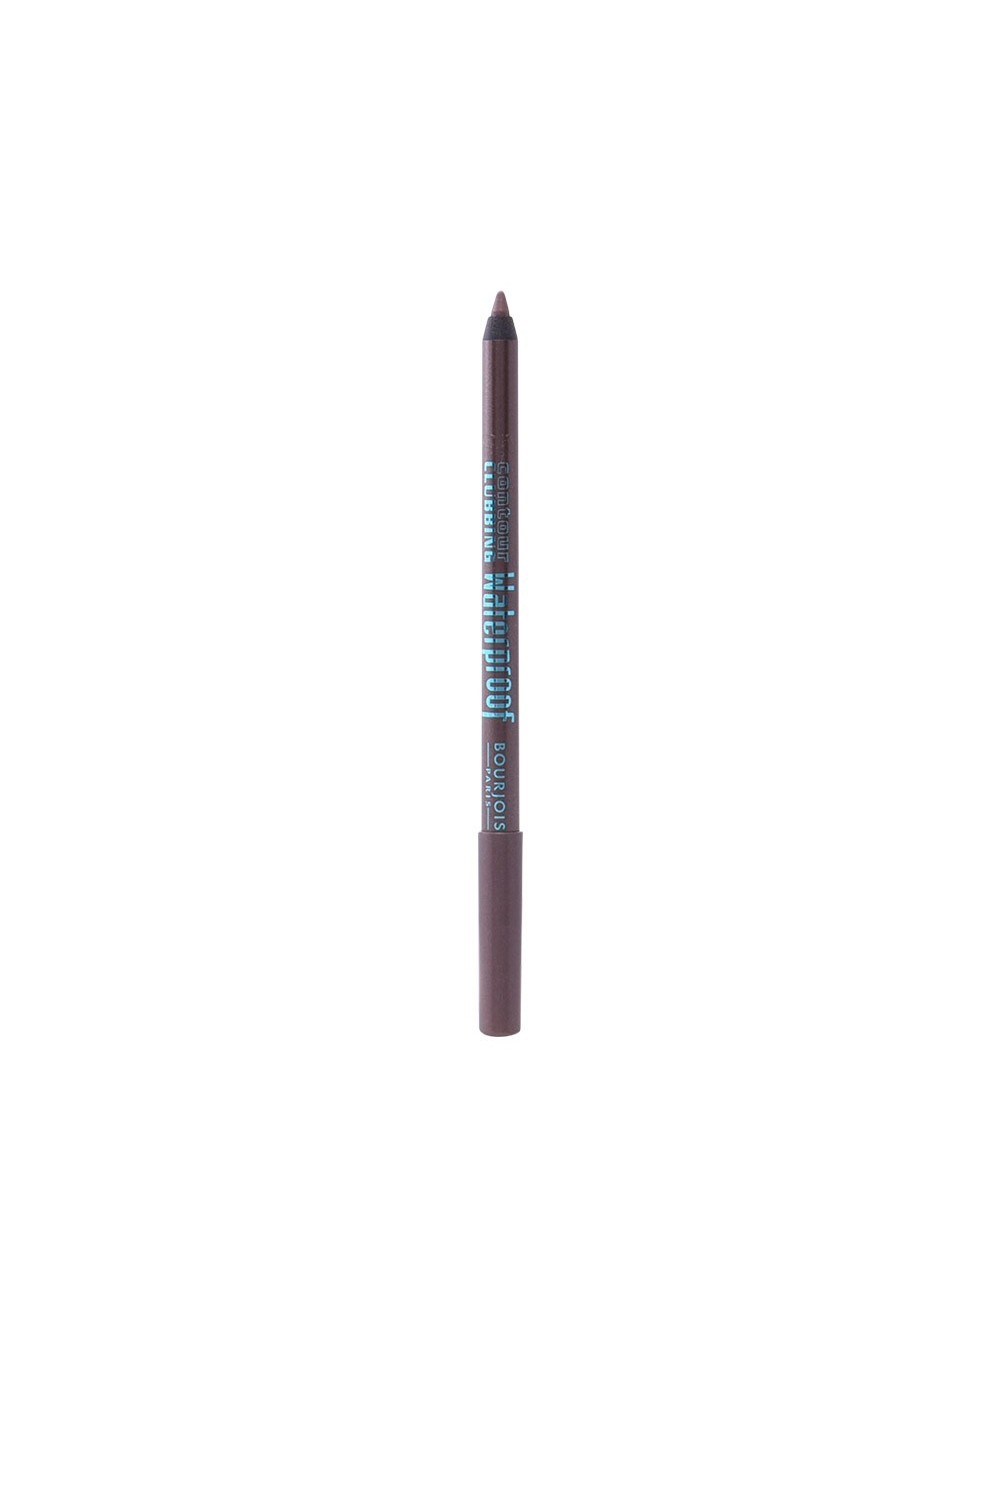 BOURJOIS - Contour Clubbing Waterproof Up and Brown T57